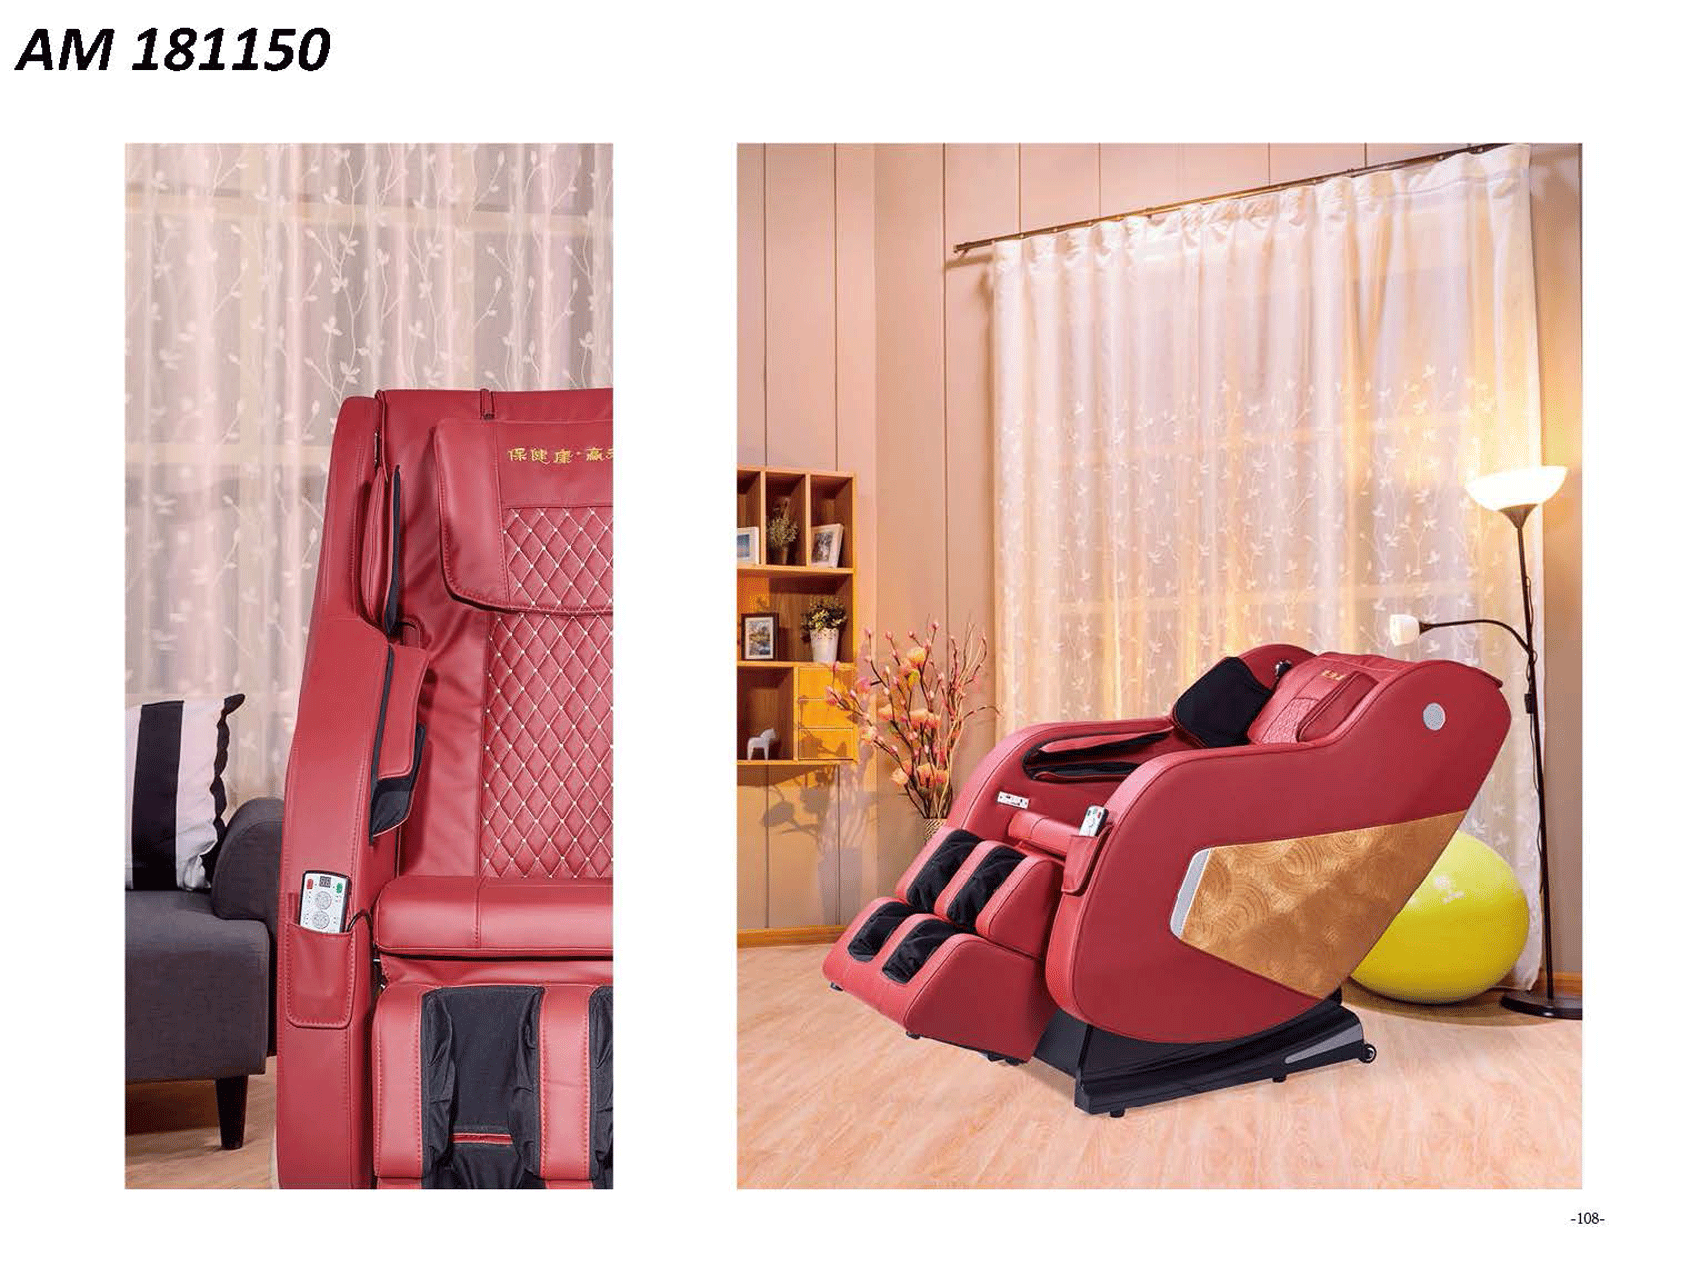 Living Room Furniture Coffee and End Tables AM 181150 Massage Chair